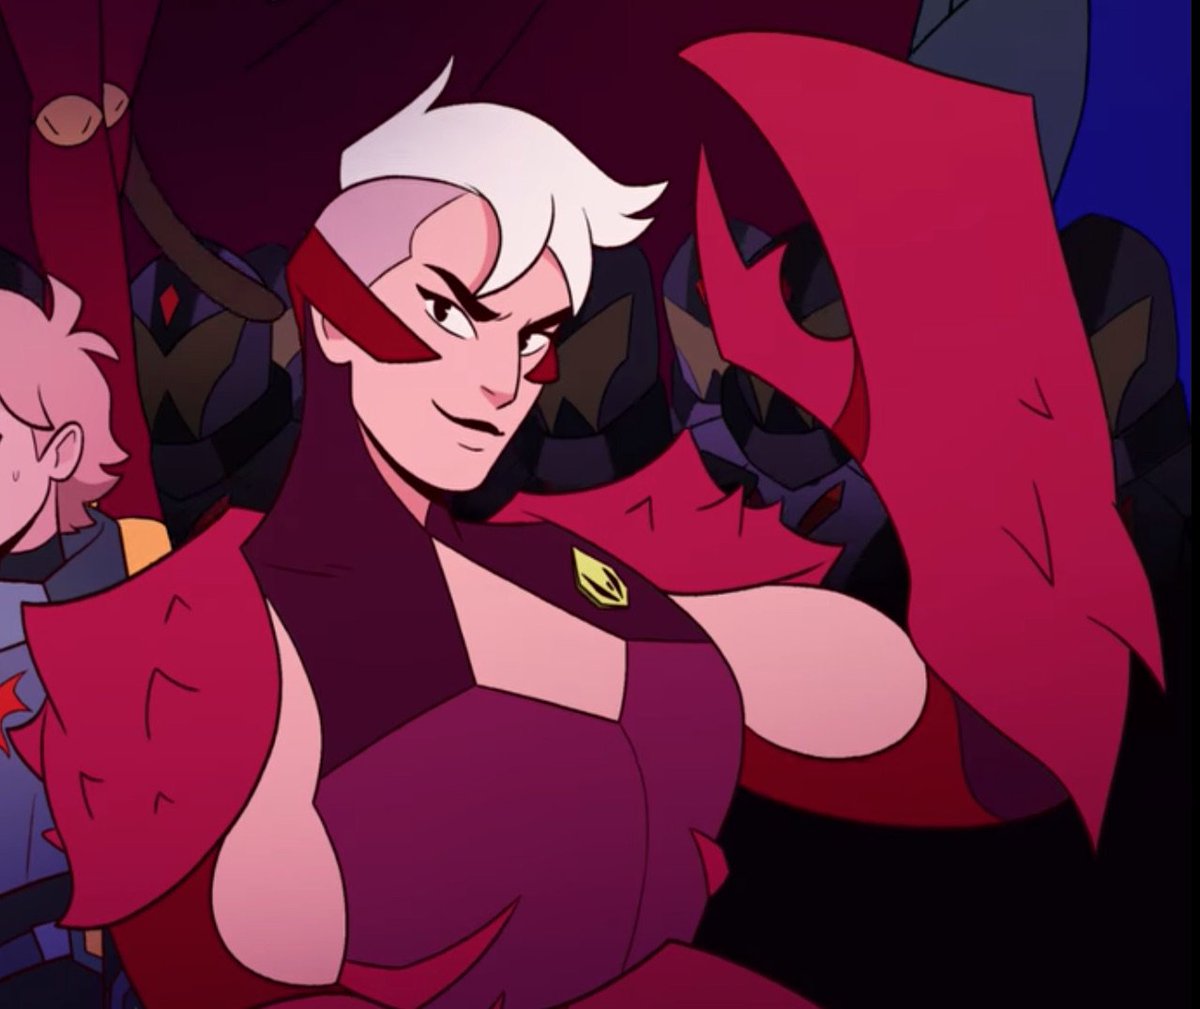 8. Scorpia from She-Ra and the Princesses of Power.